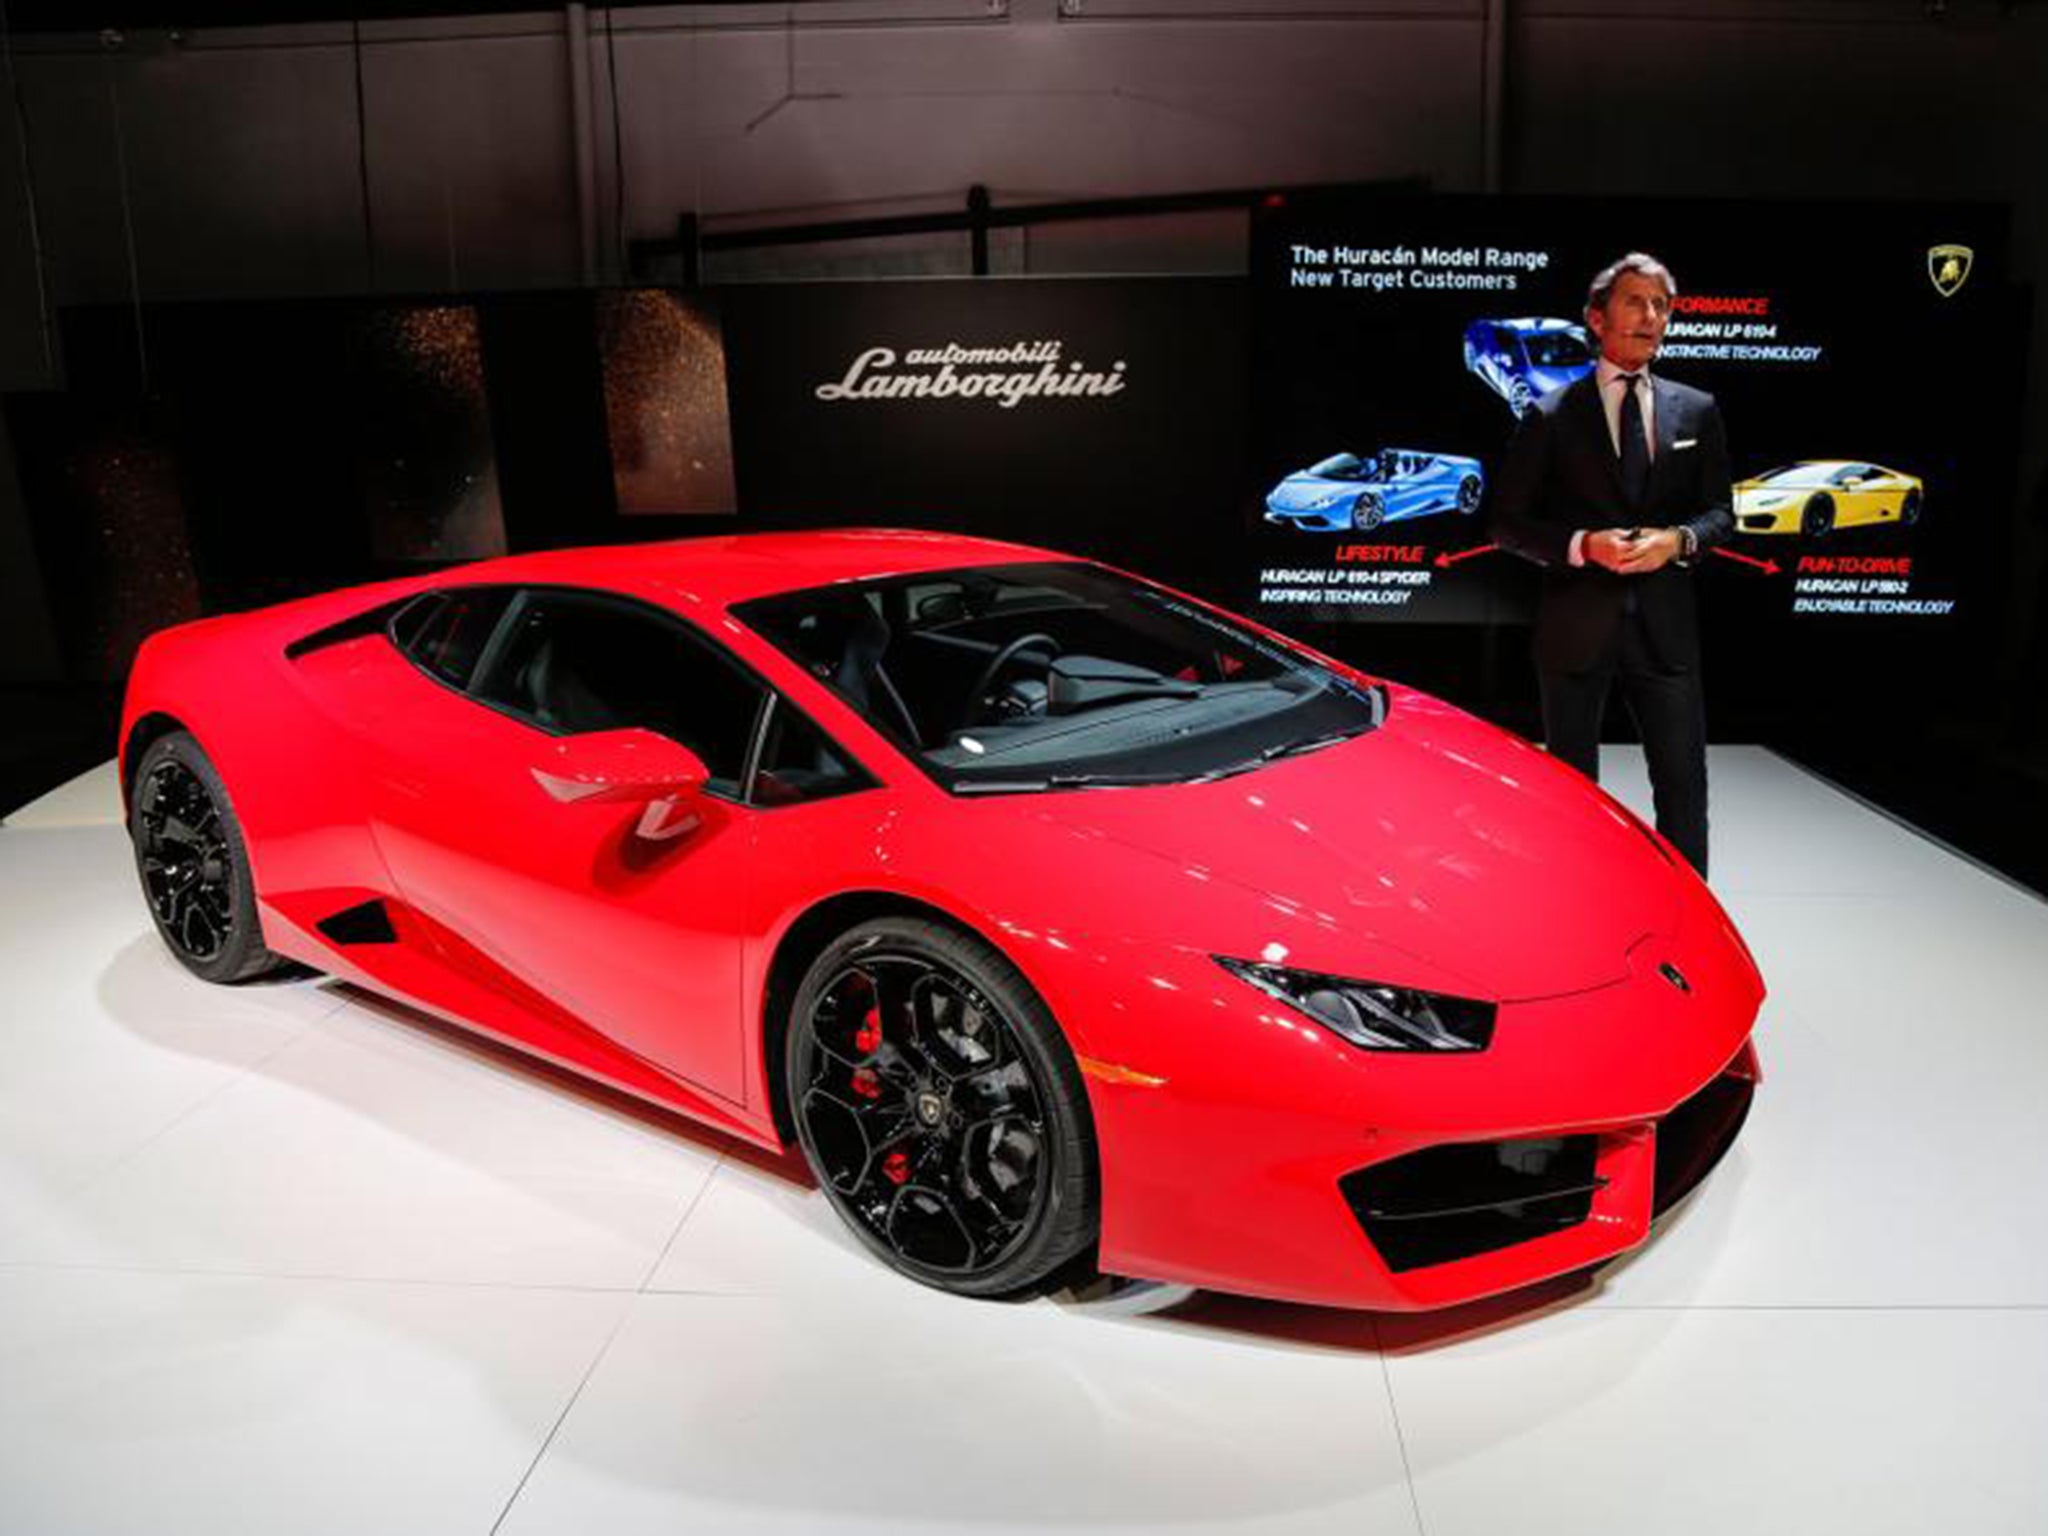 The new model was unveiled at the Los Angeles Motor Show